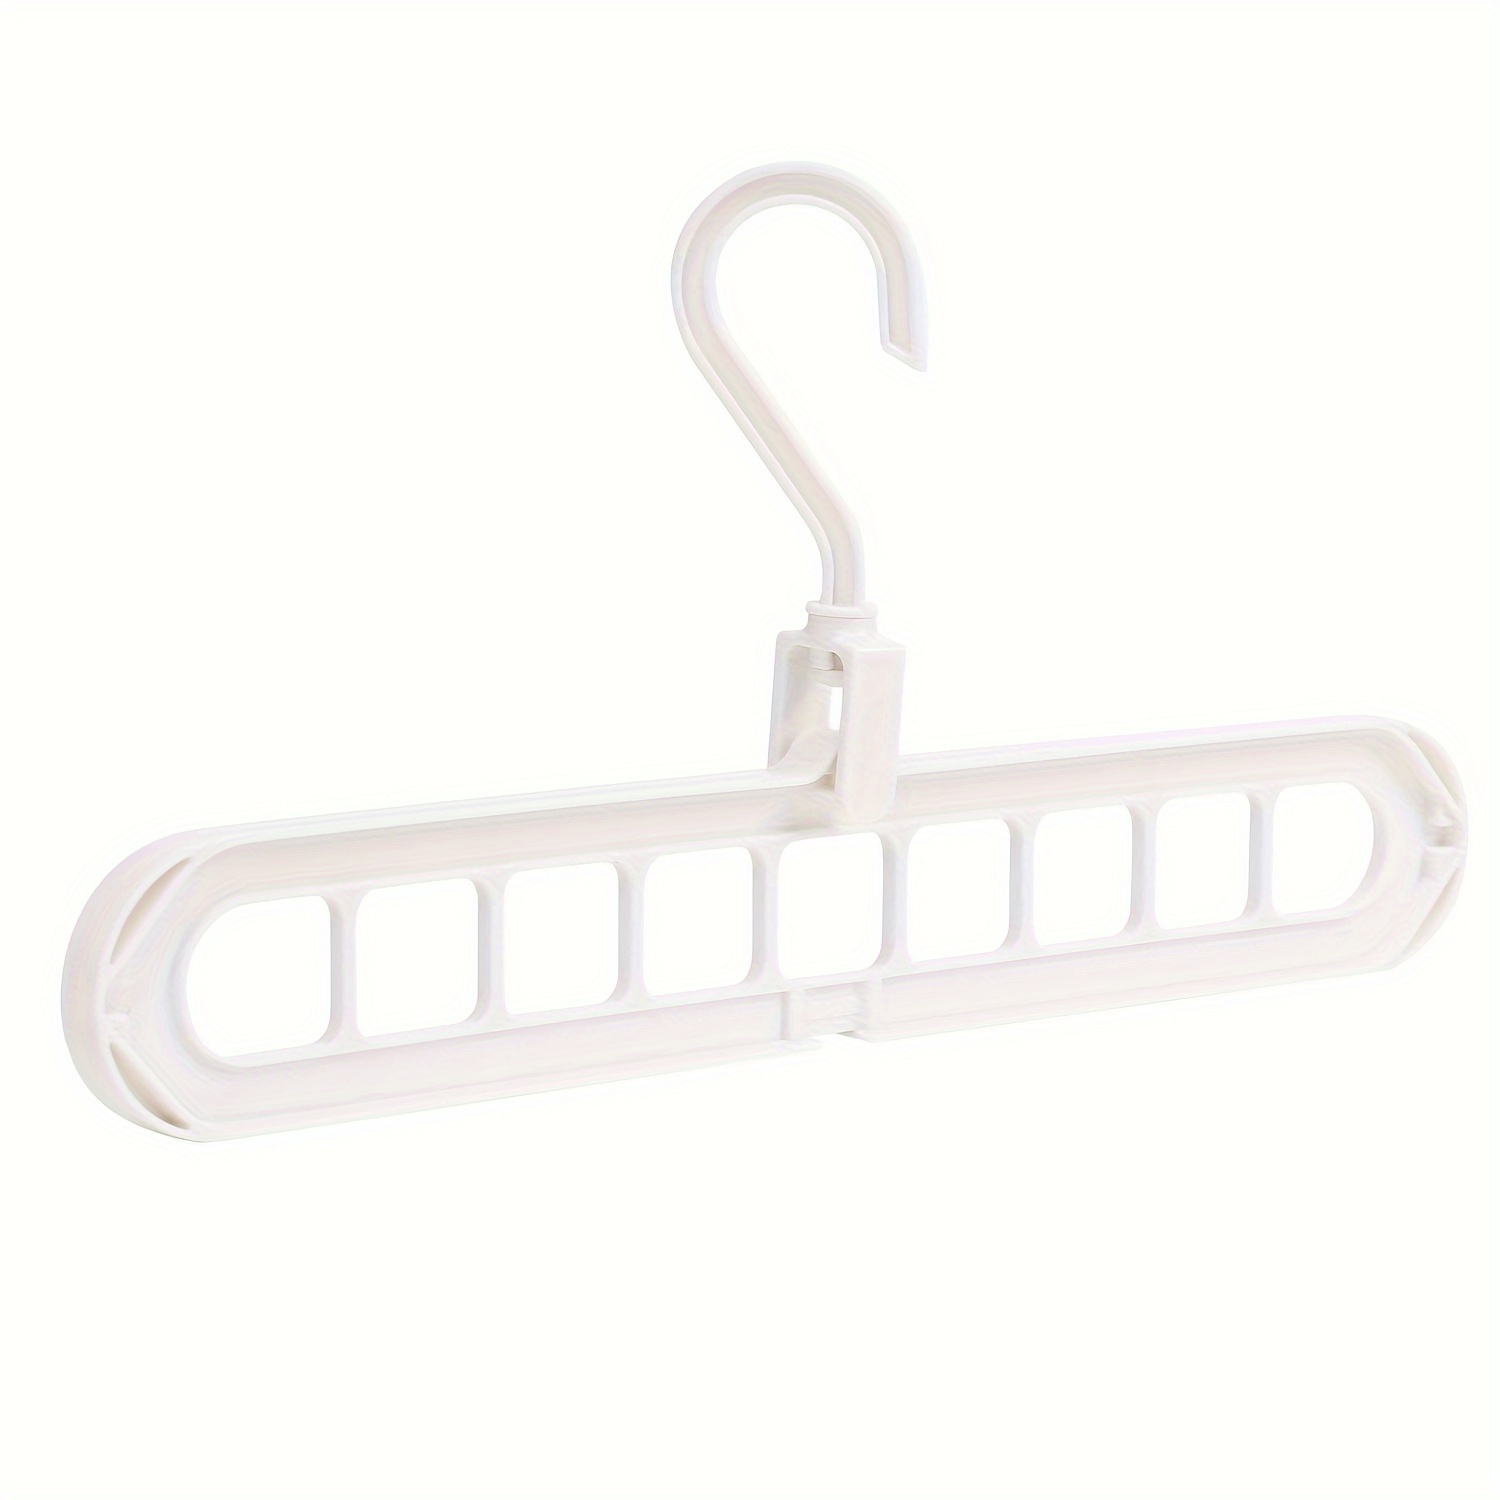 Clothes Hangers for Space Saving Wardrobe Organizer Clothes Rack 9 Slots  Design for Heavy Clothes Shirts Pants Dresses Coats